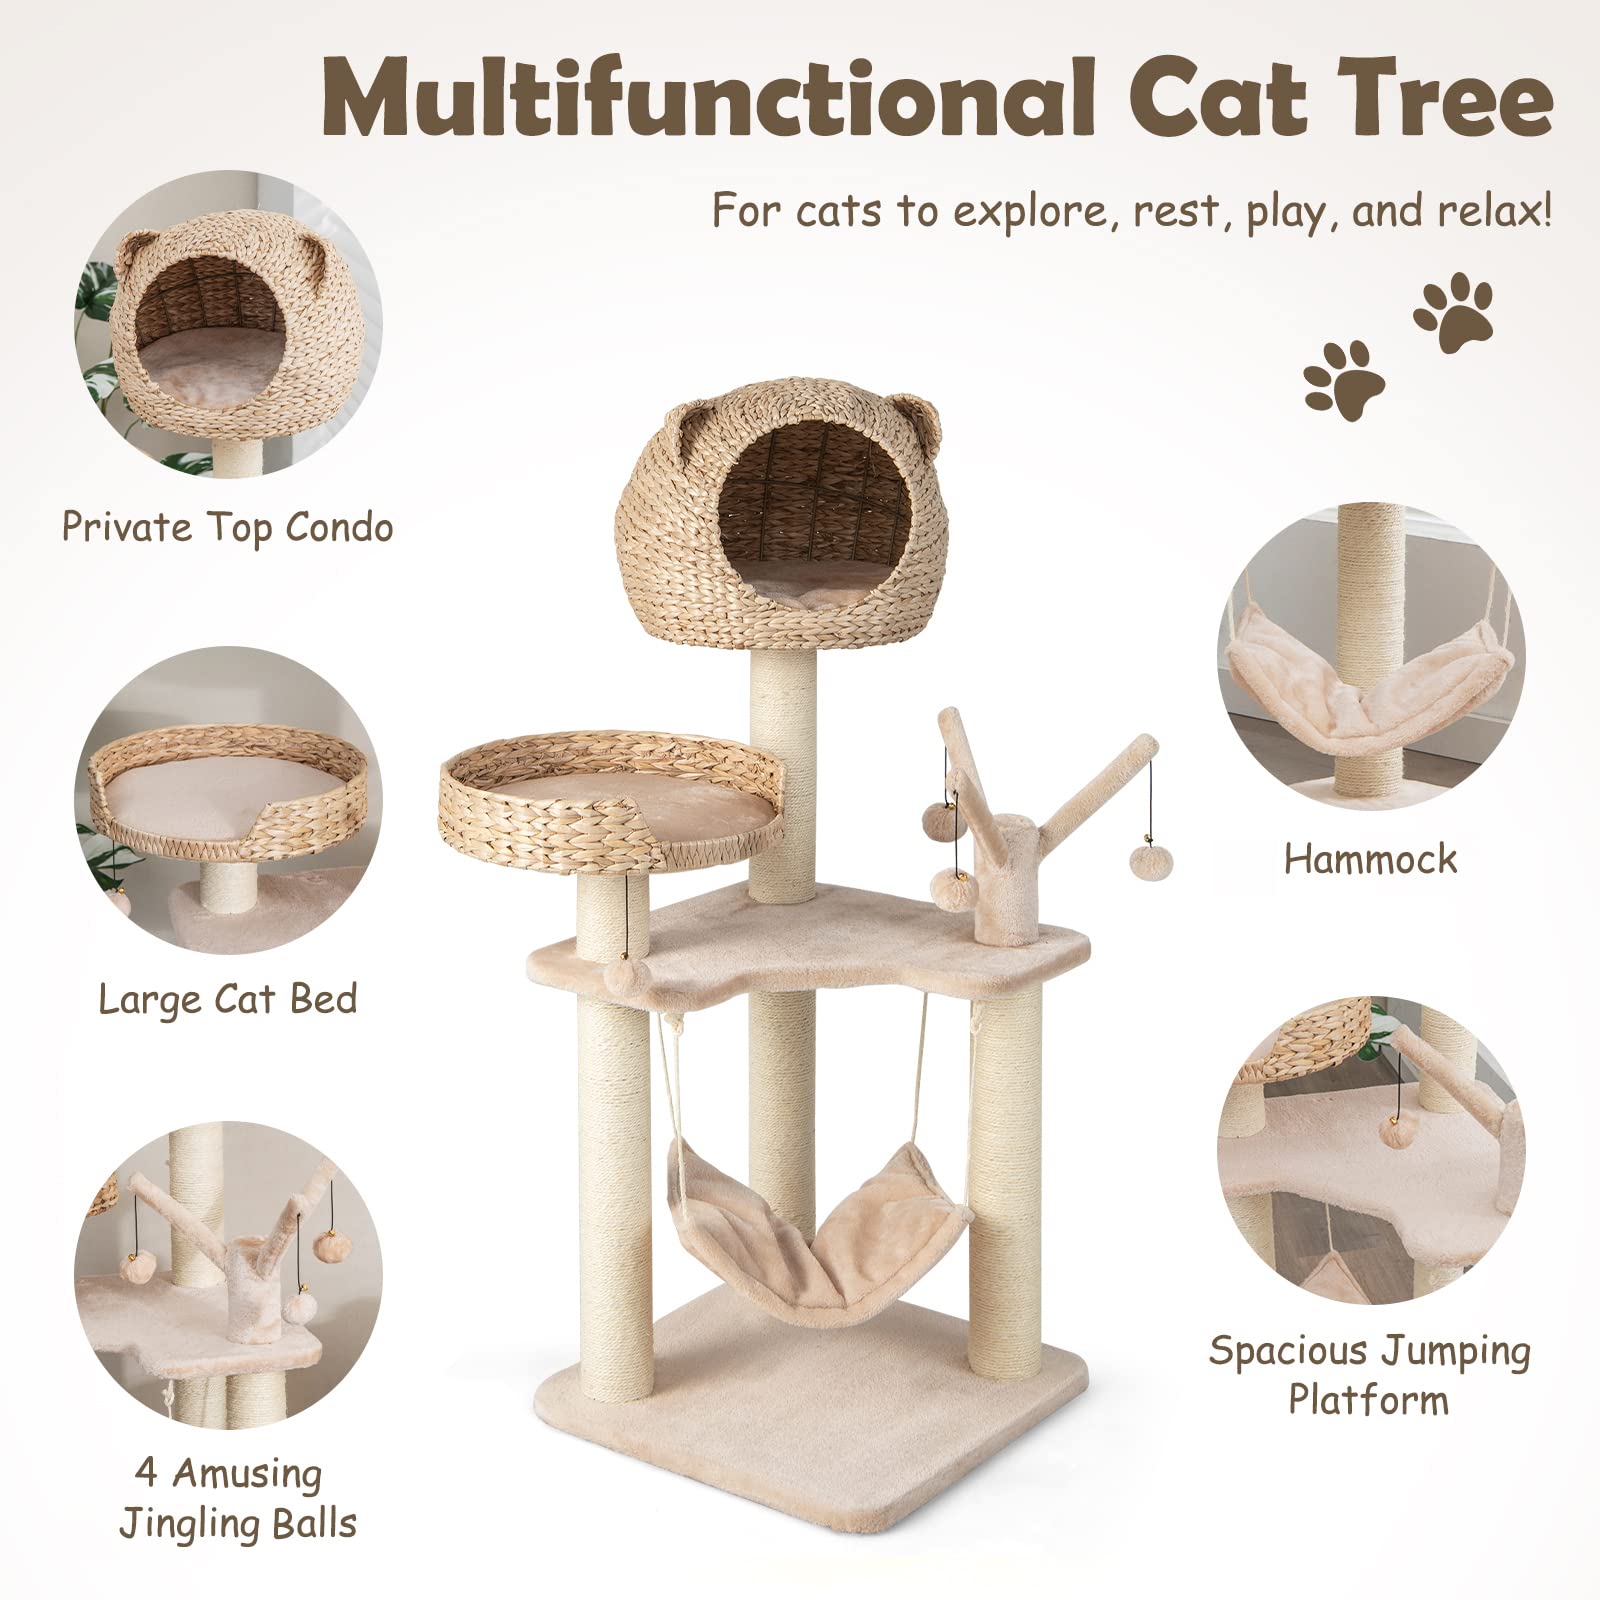 Giantex Wooden Cat Tree, 48 inches Cat Tower with Cattail Condo, Cat Bed, Hammock, Rotatable Jingling Balls